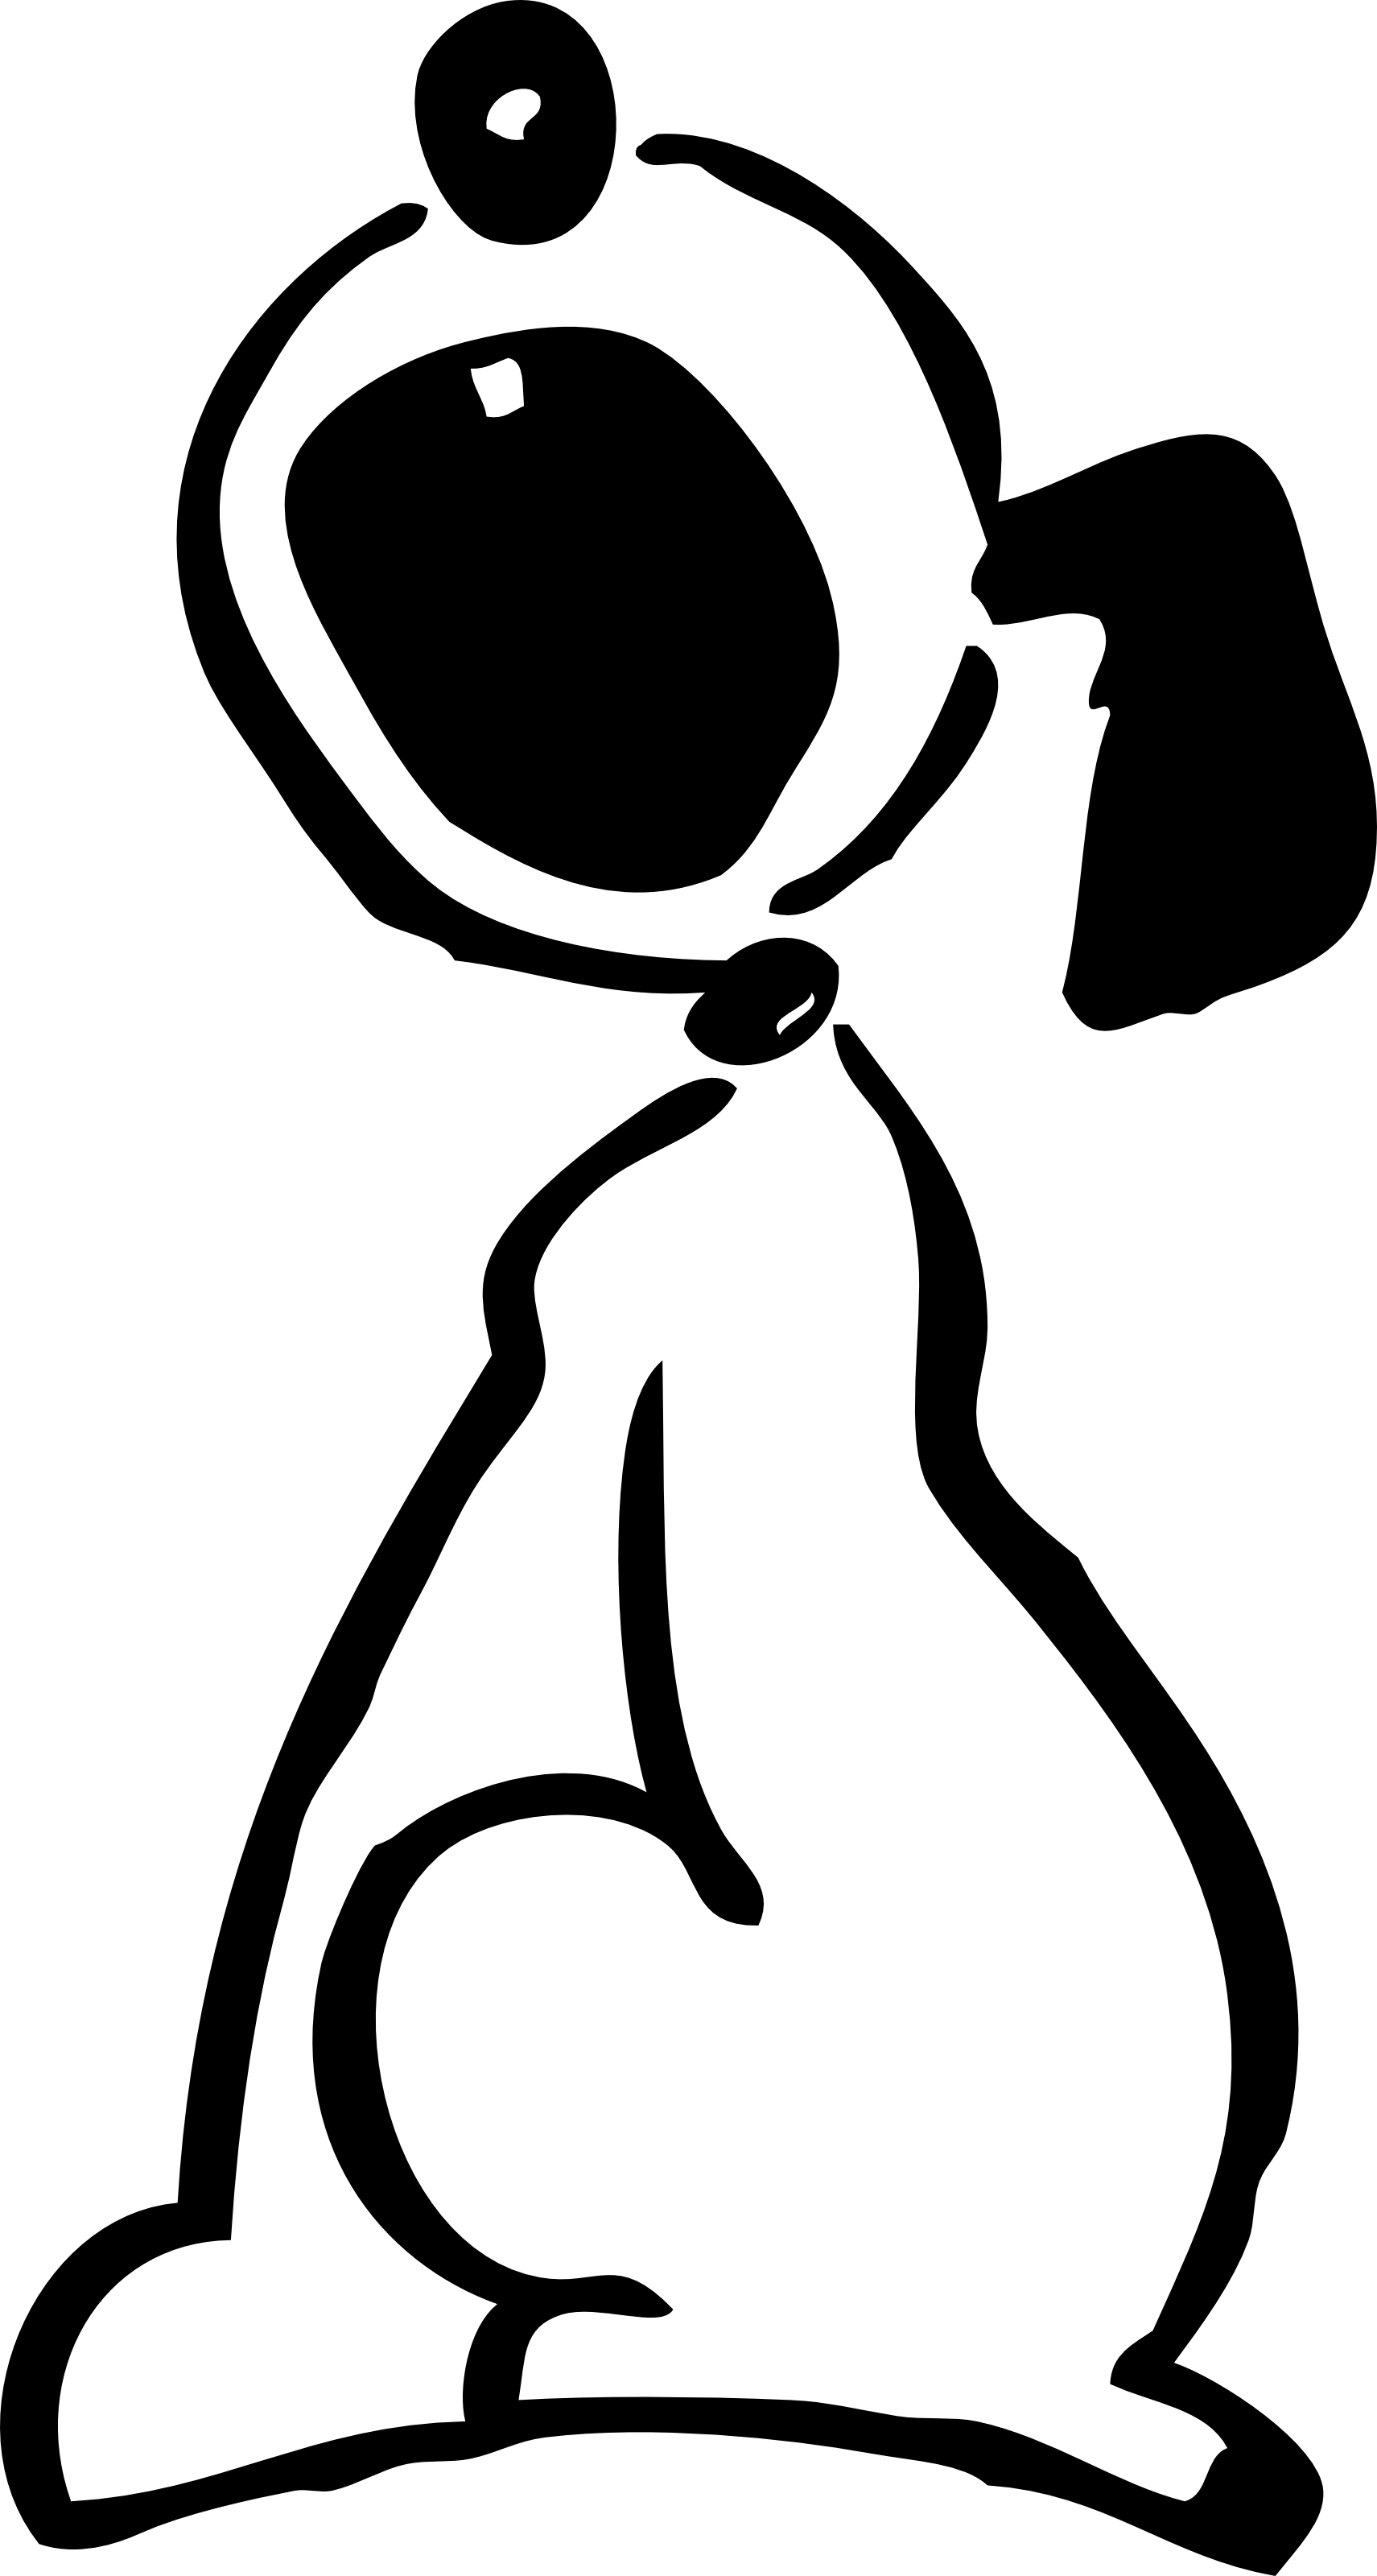 Puppy Dog Face Clip Art | Clipart library - Free Clipart Images